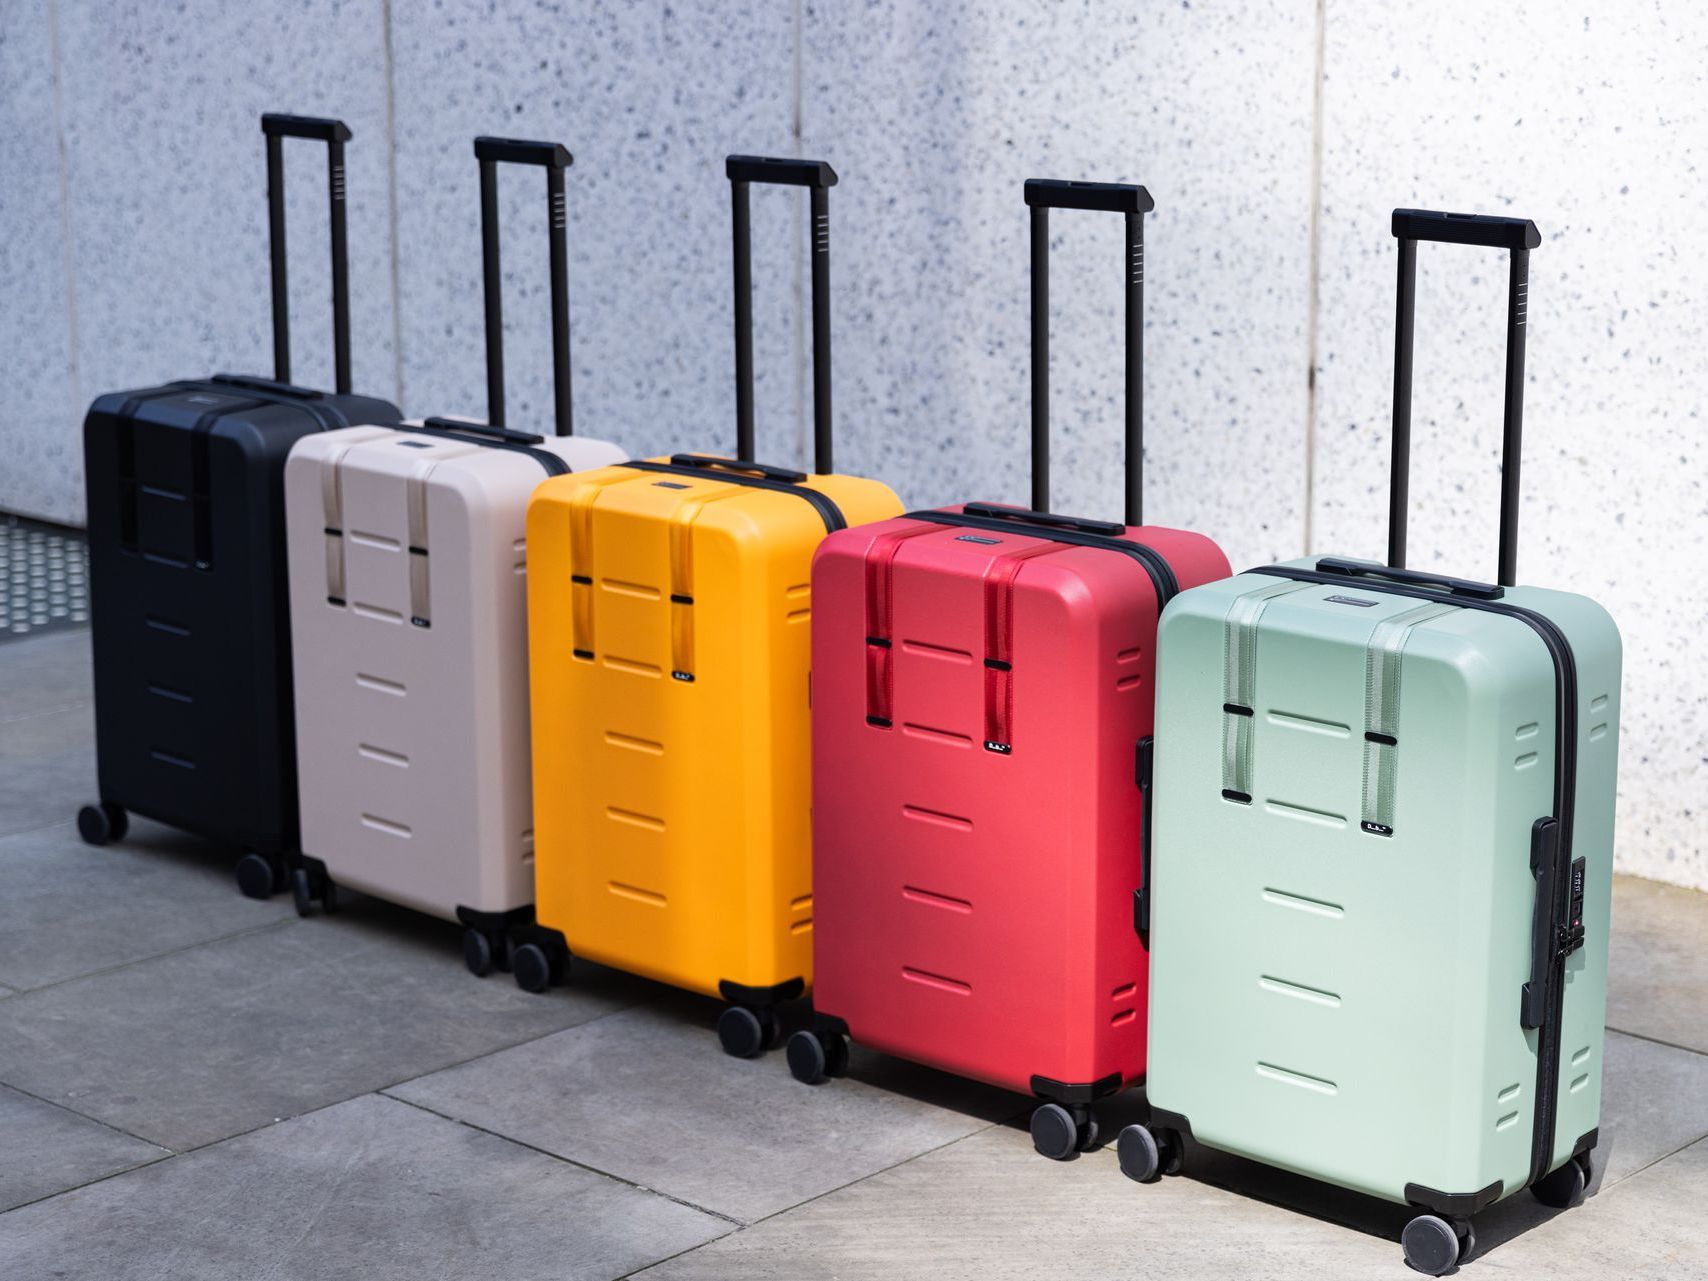 Luggage made from recycled materials by Db